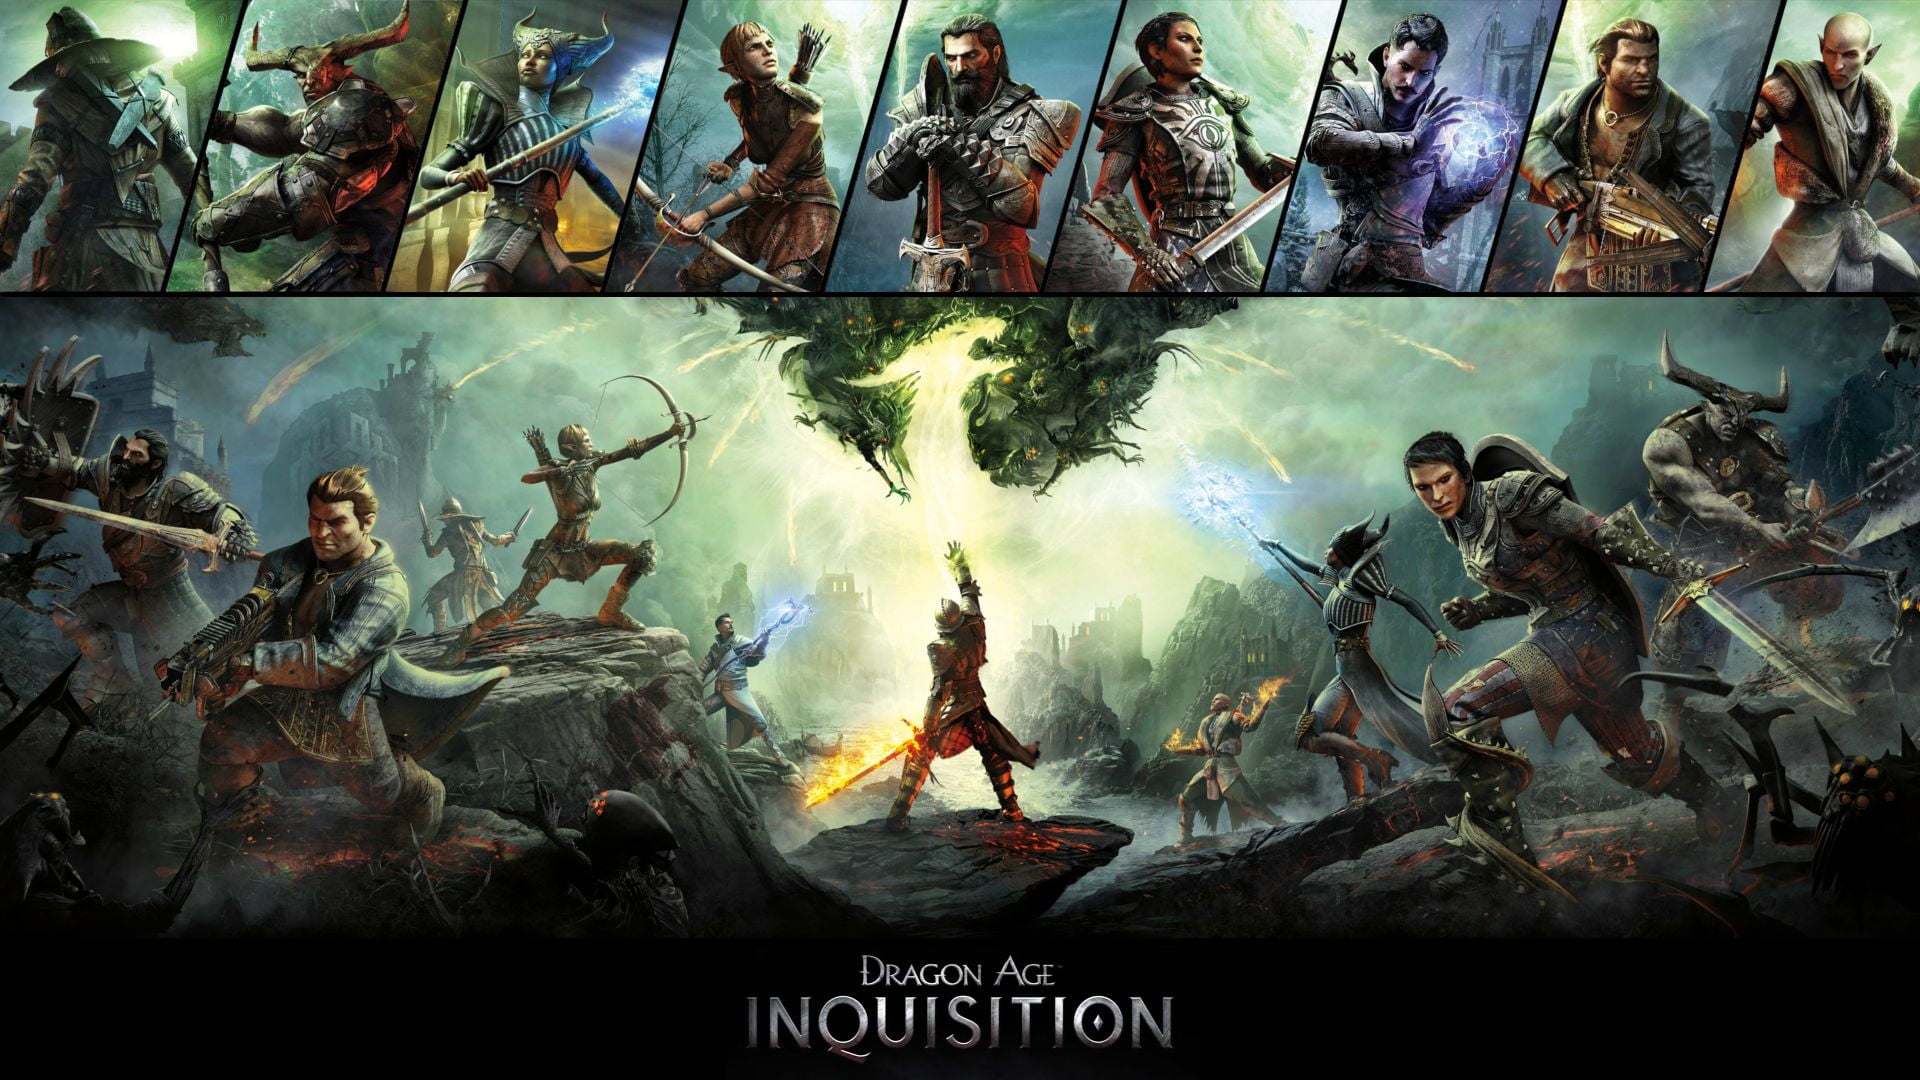 Dragon Ace Inquisition video game screenshot, Dragon Age Inquisition